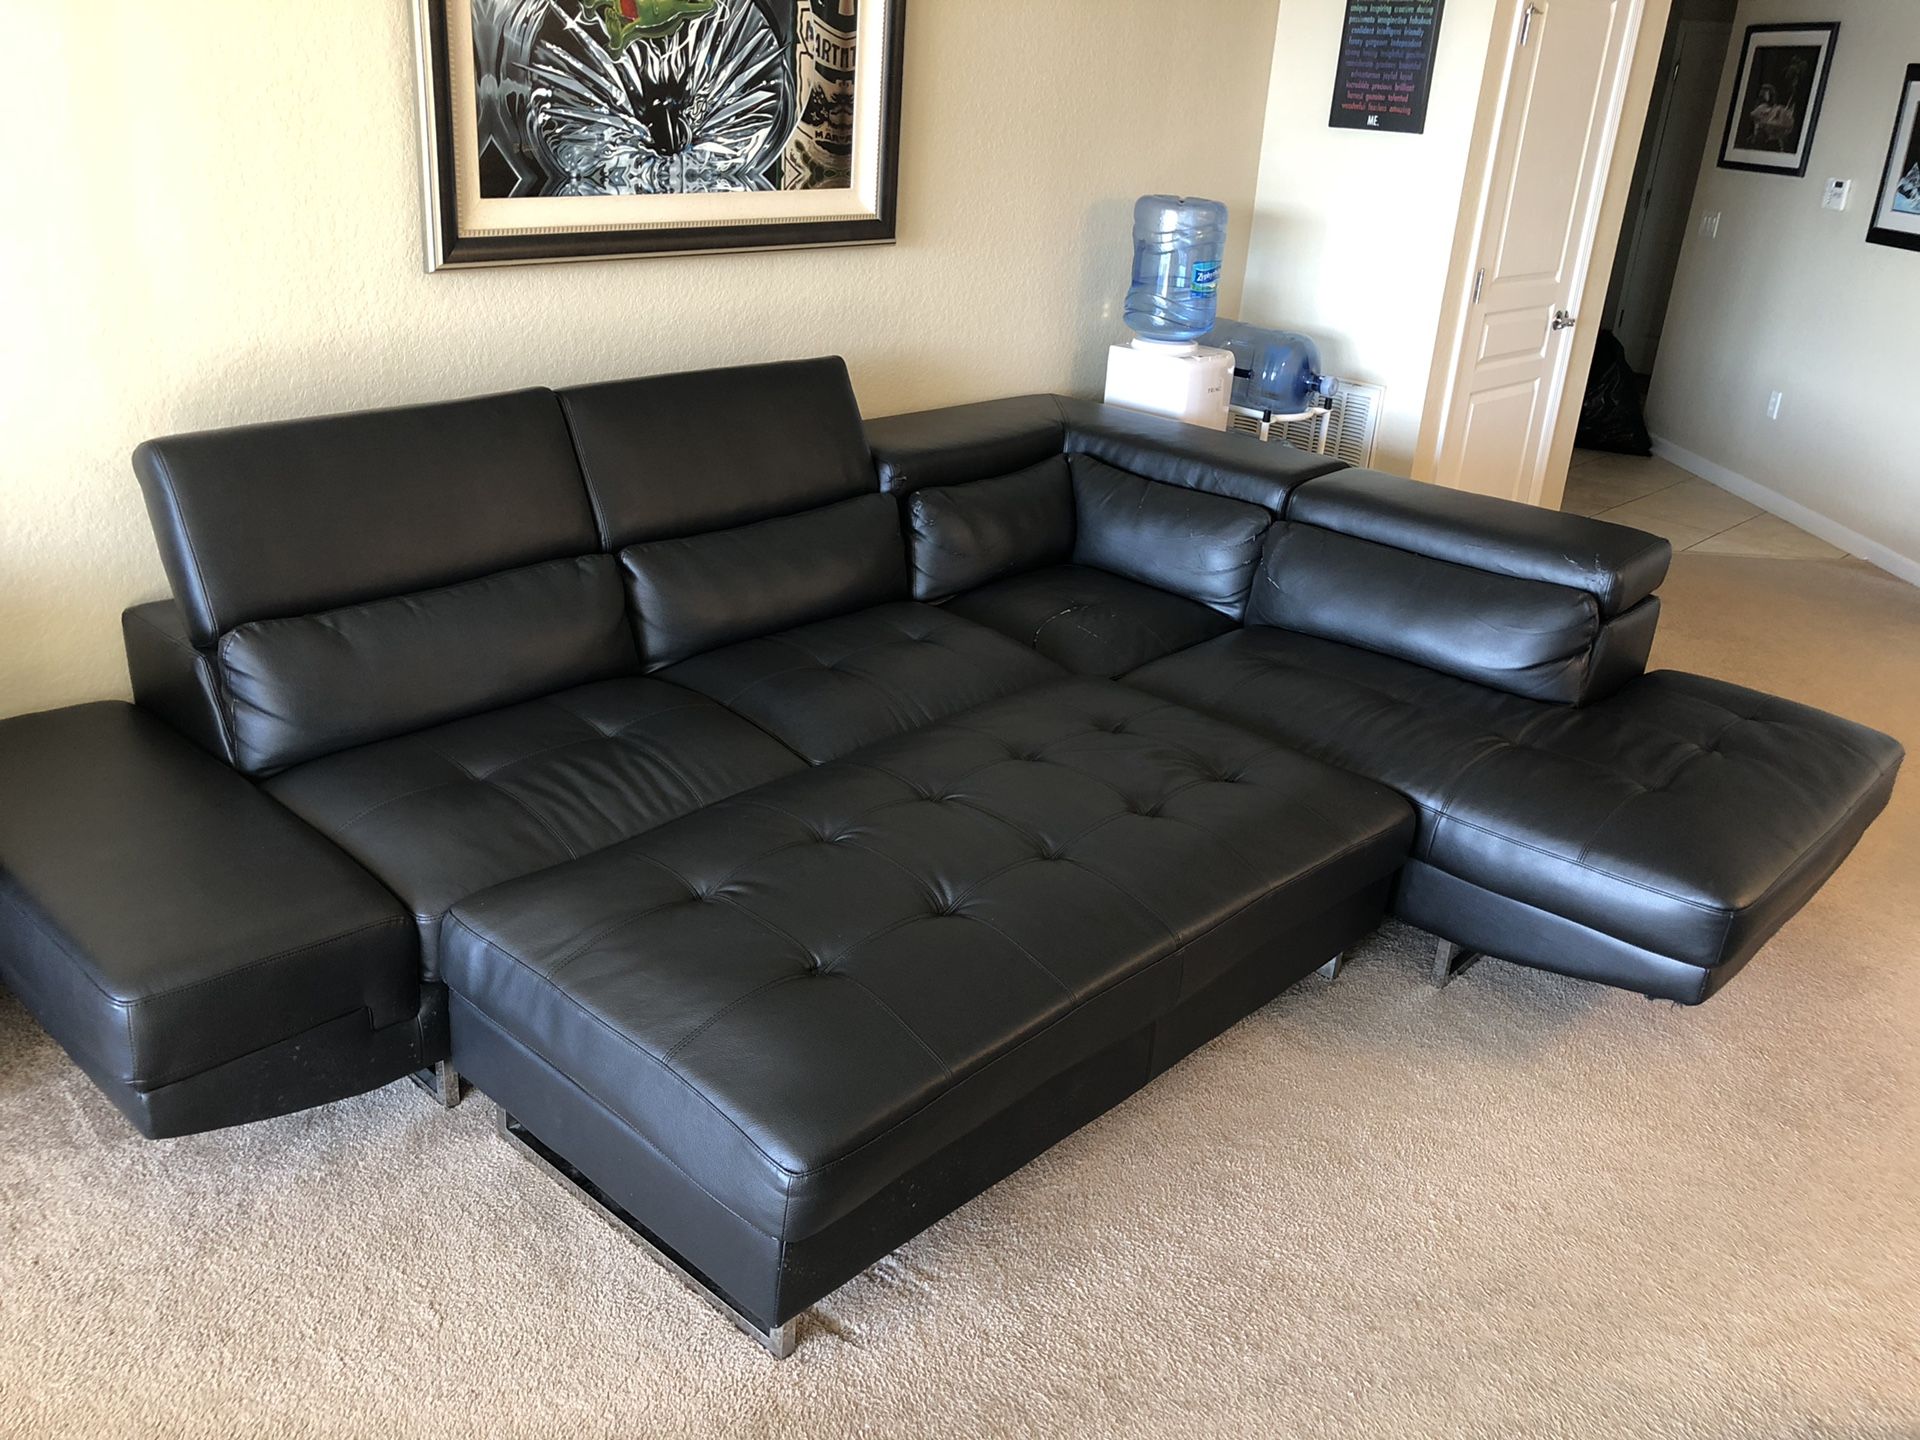 Luxury Black Sectional Couch—3 Pieces, $300–Must Be Picked Up No Later Than 5pm Tomorrow.